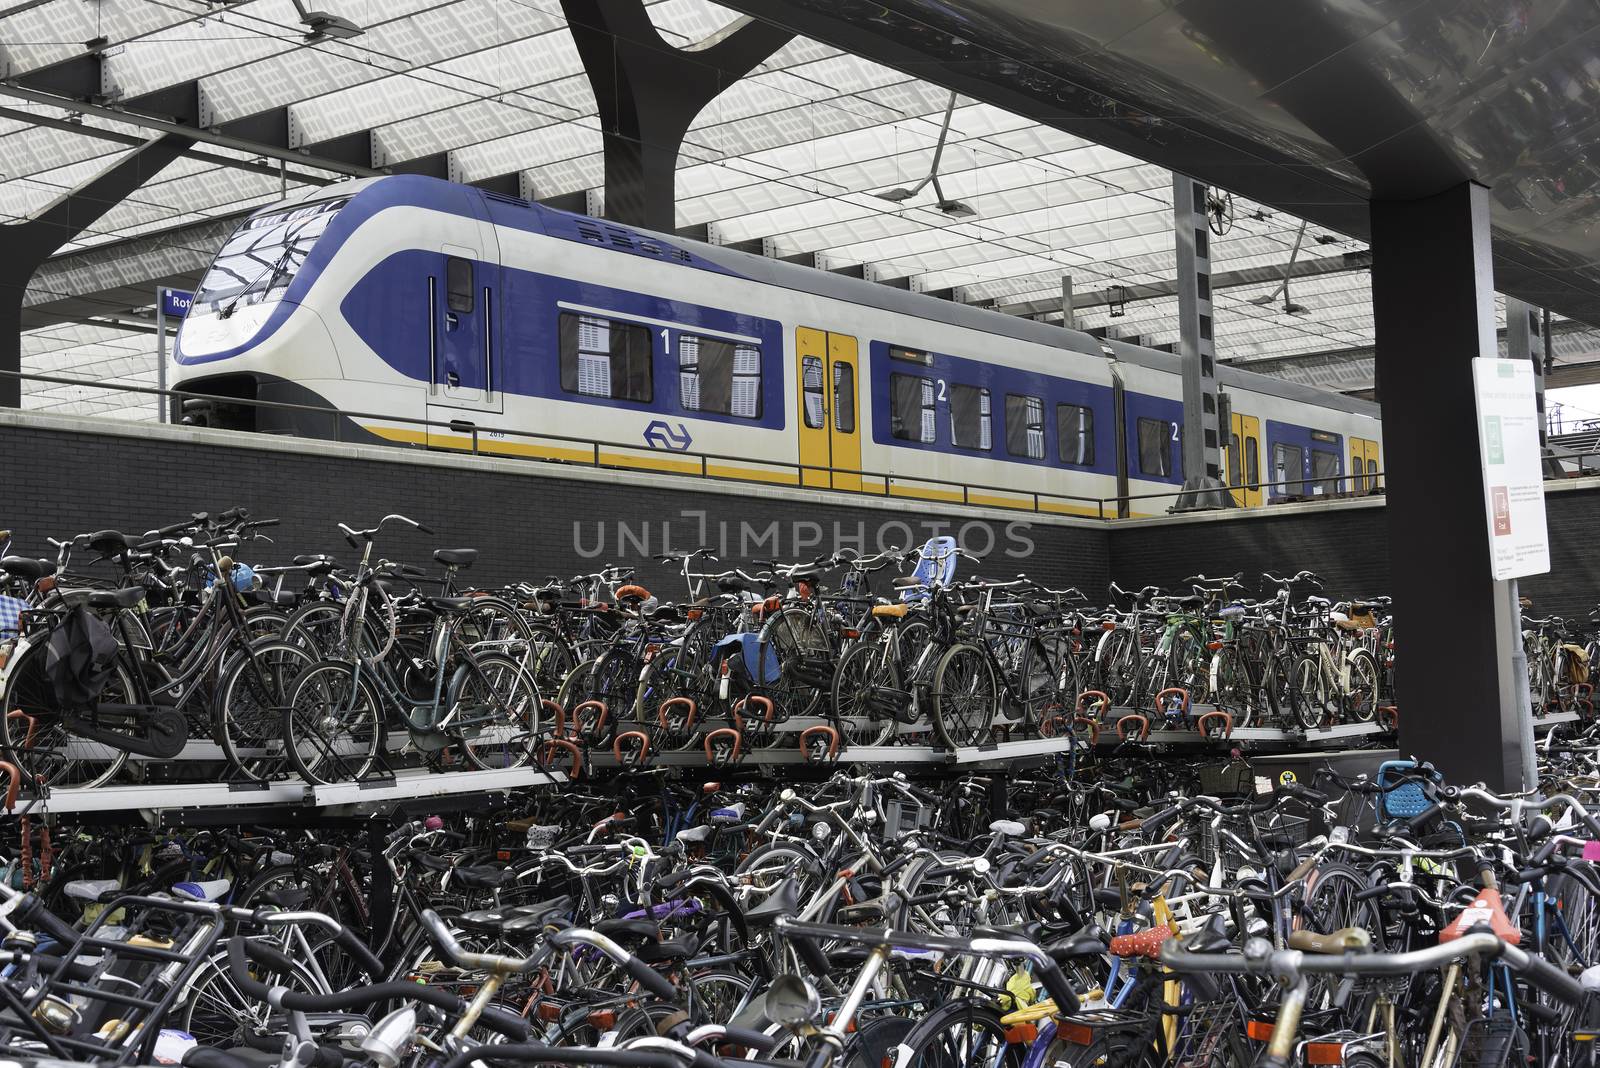 ROTTERDAM,HOLLAND-MAY 18, new bicycle storage for thousand of bikes at the backsite of the new build rotterdam central station on May 18 2016 in Rotterrdam, this station is opened in end 2015